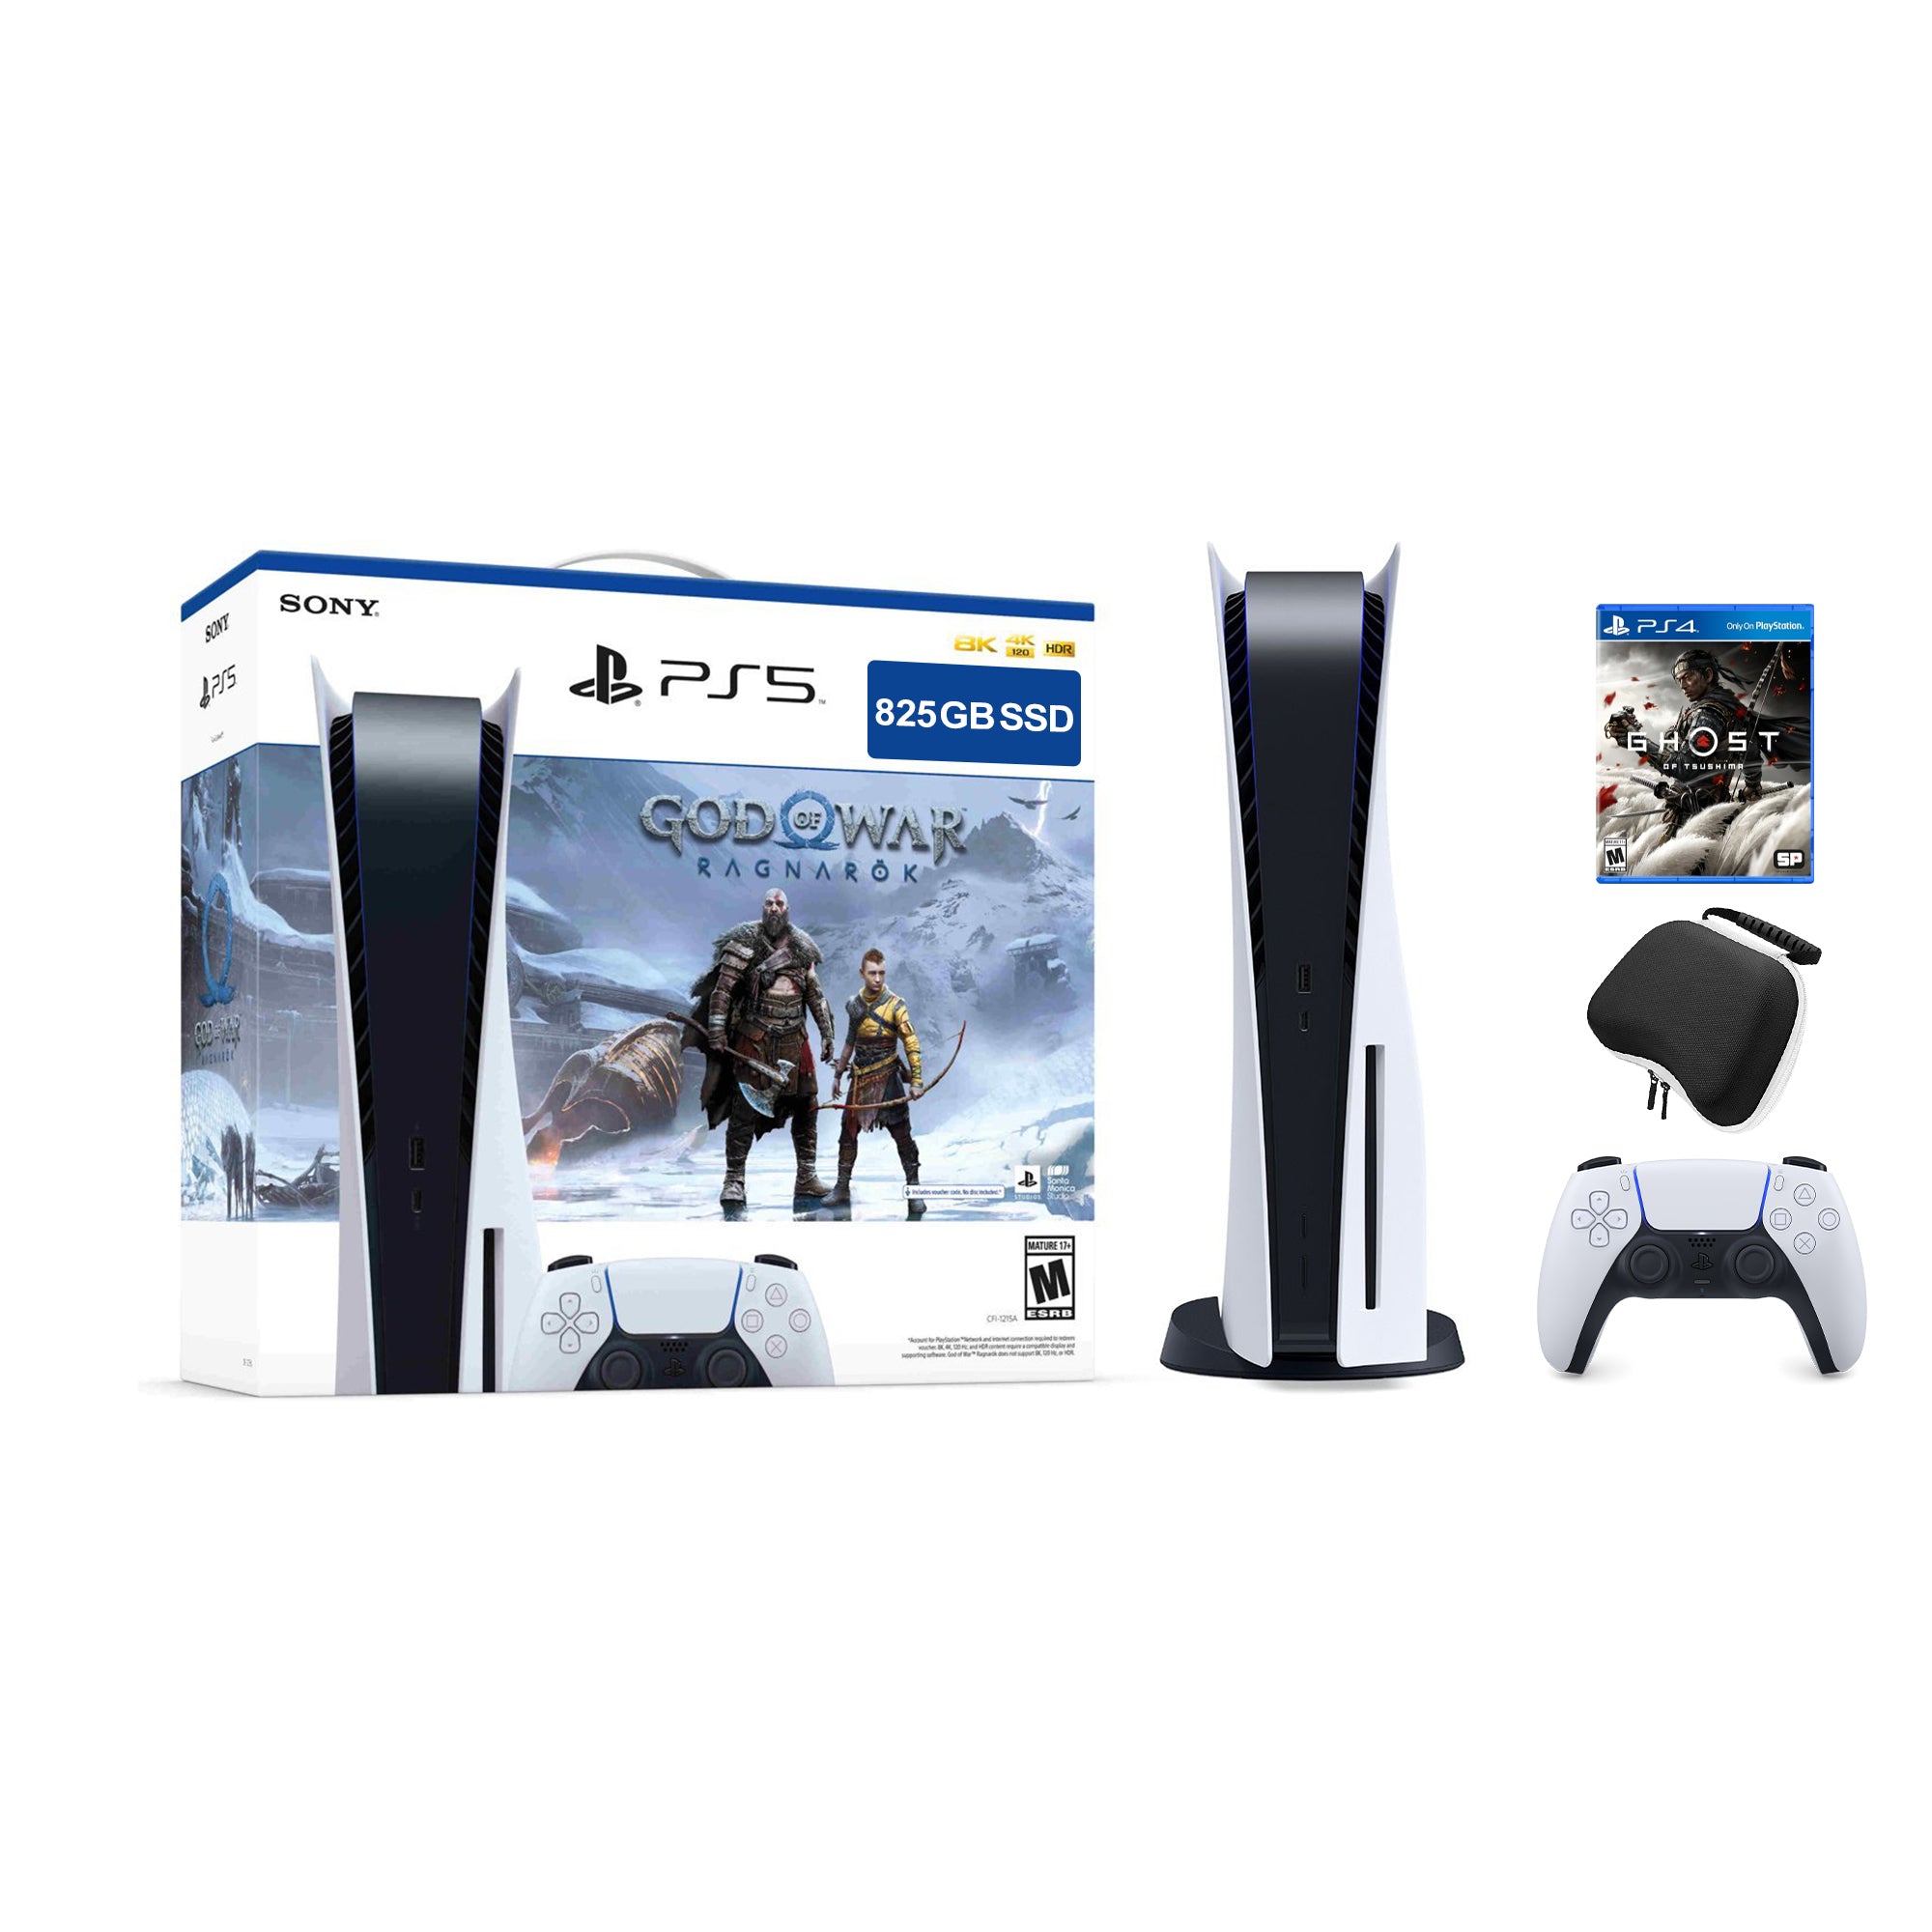 PlayStation 5 Disc Edition God of War Ragnarok Bundle with Ghost of Tsushima and Mytrix Controller Case